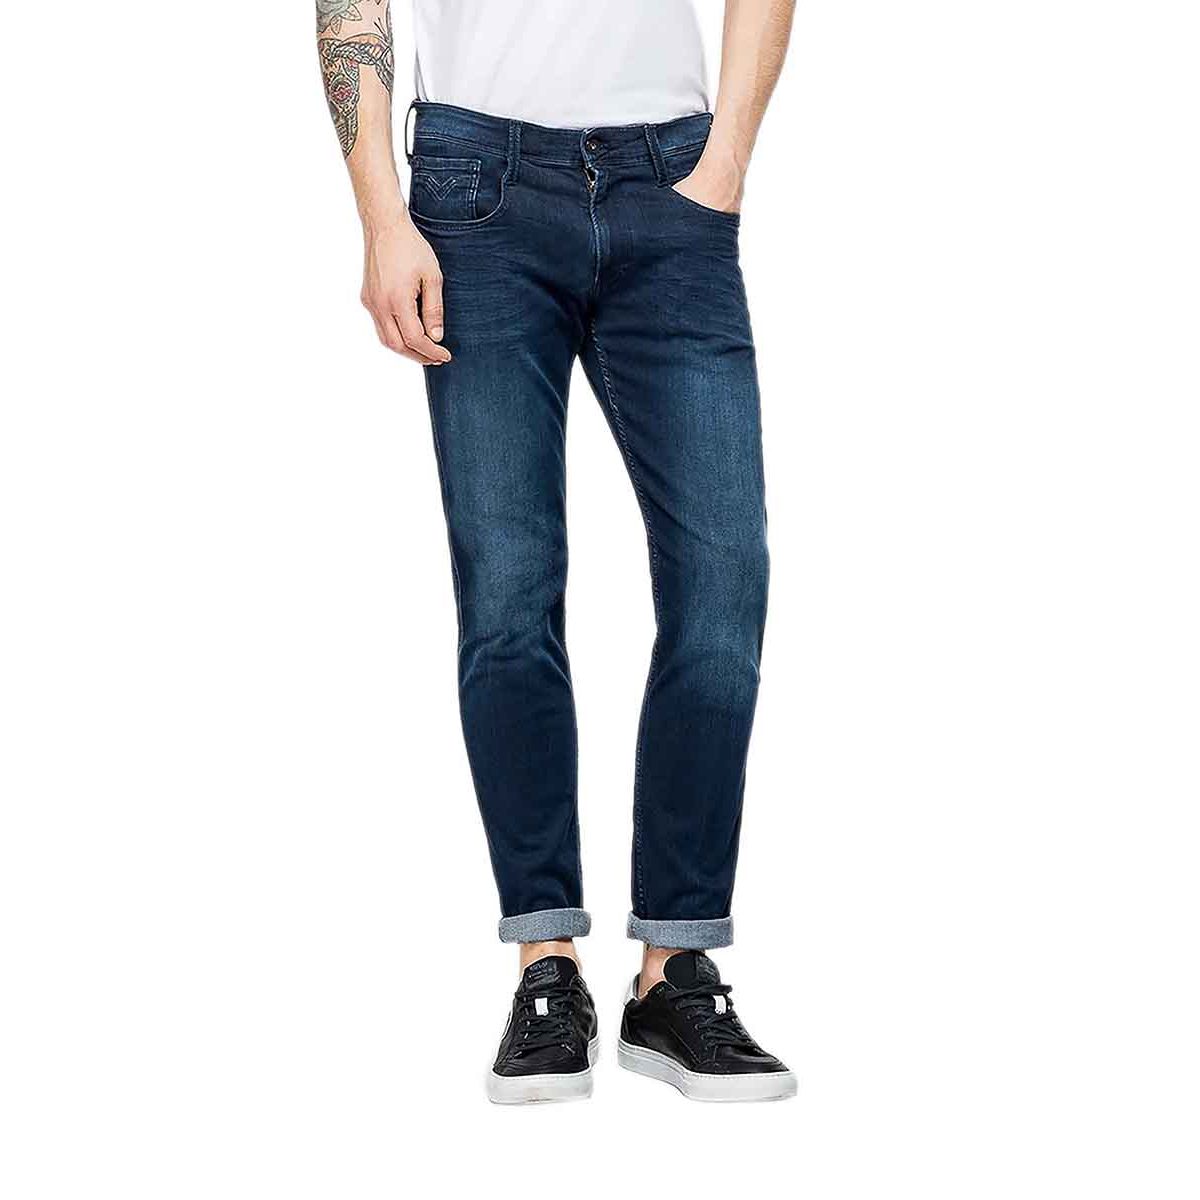 JEANS REPLAY M914 000 41A 783 009 3